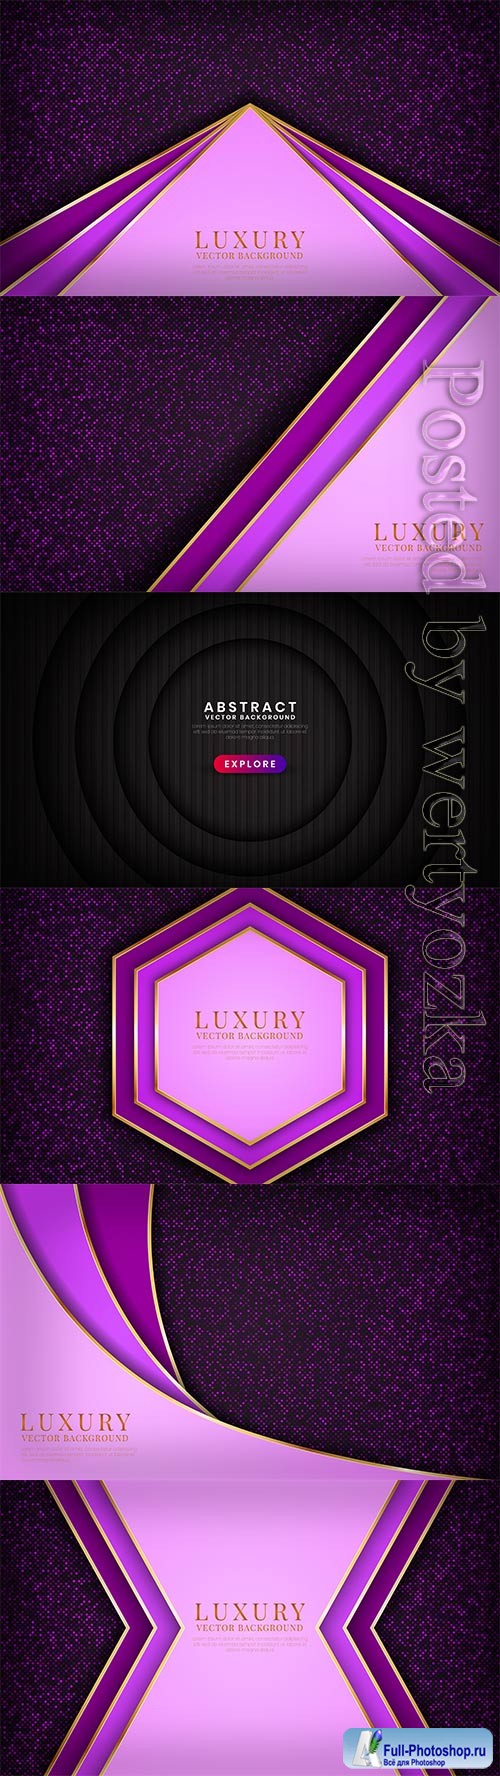 Abstract vector backgrounds with lilac design